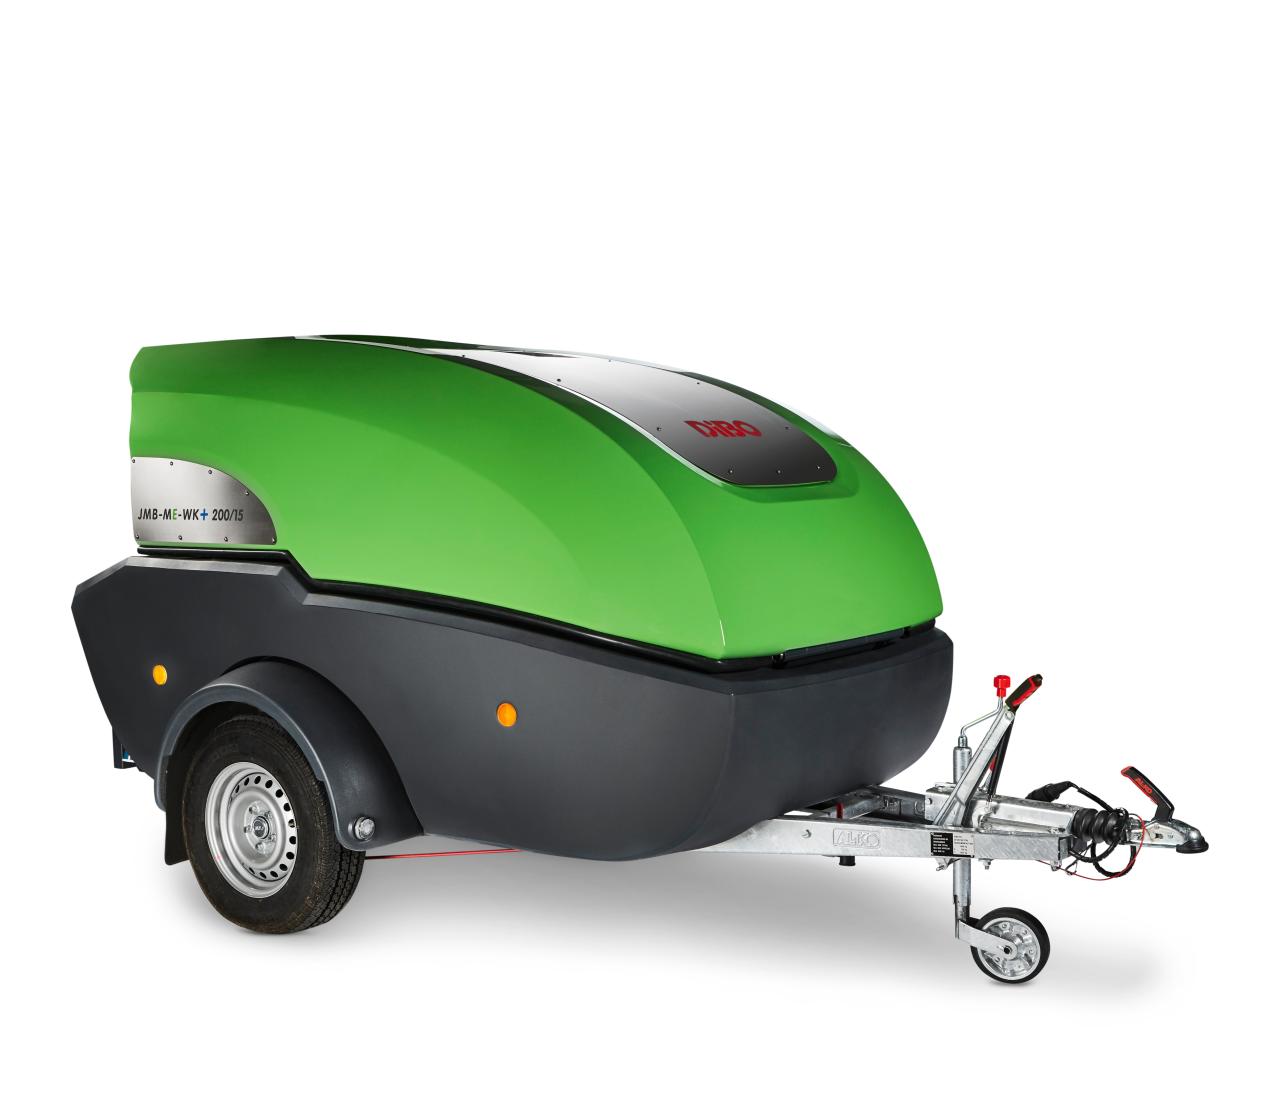 DiBO JMB-ME Powerful high-pressure trailer with water-cooled electric motor and CNG gas burner